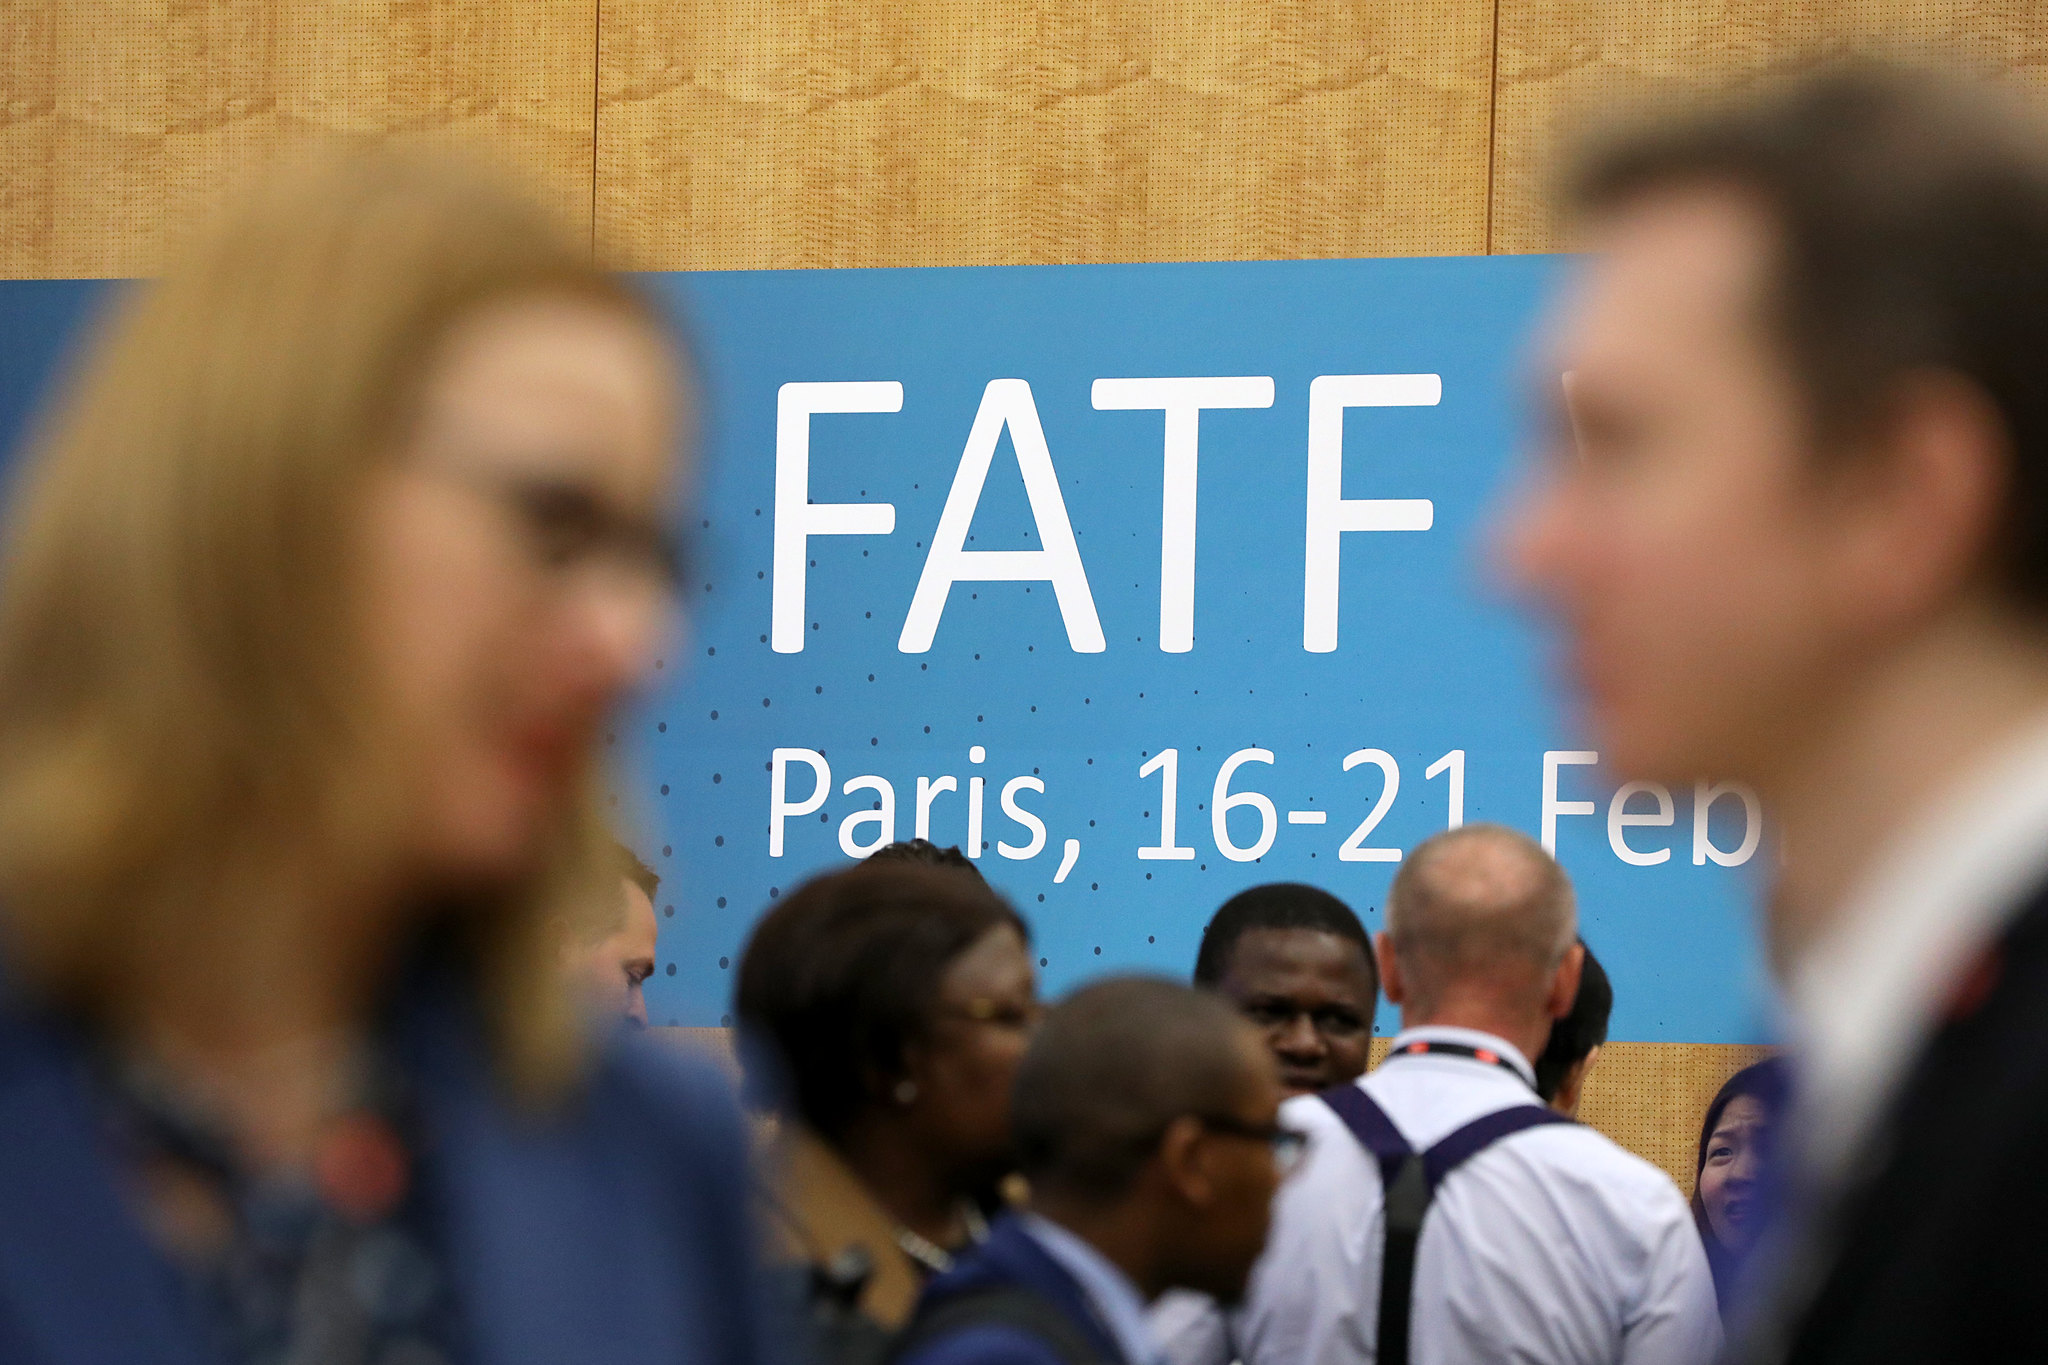 FATF Meets Wednesday to Focus on ‘Journey Rule’ for Digital Property